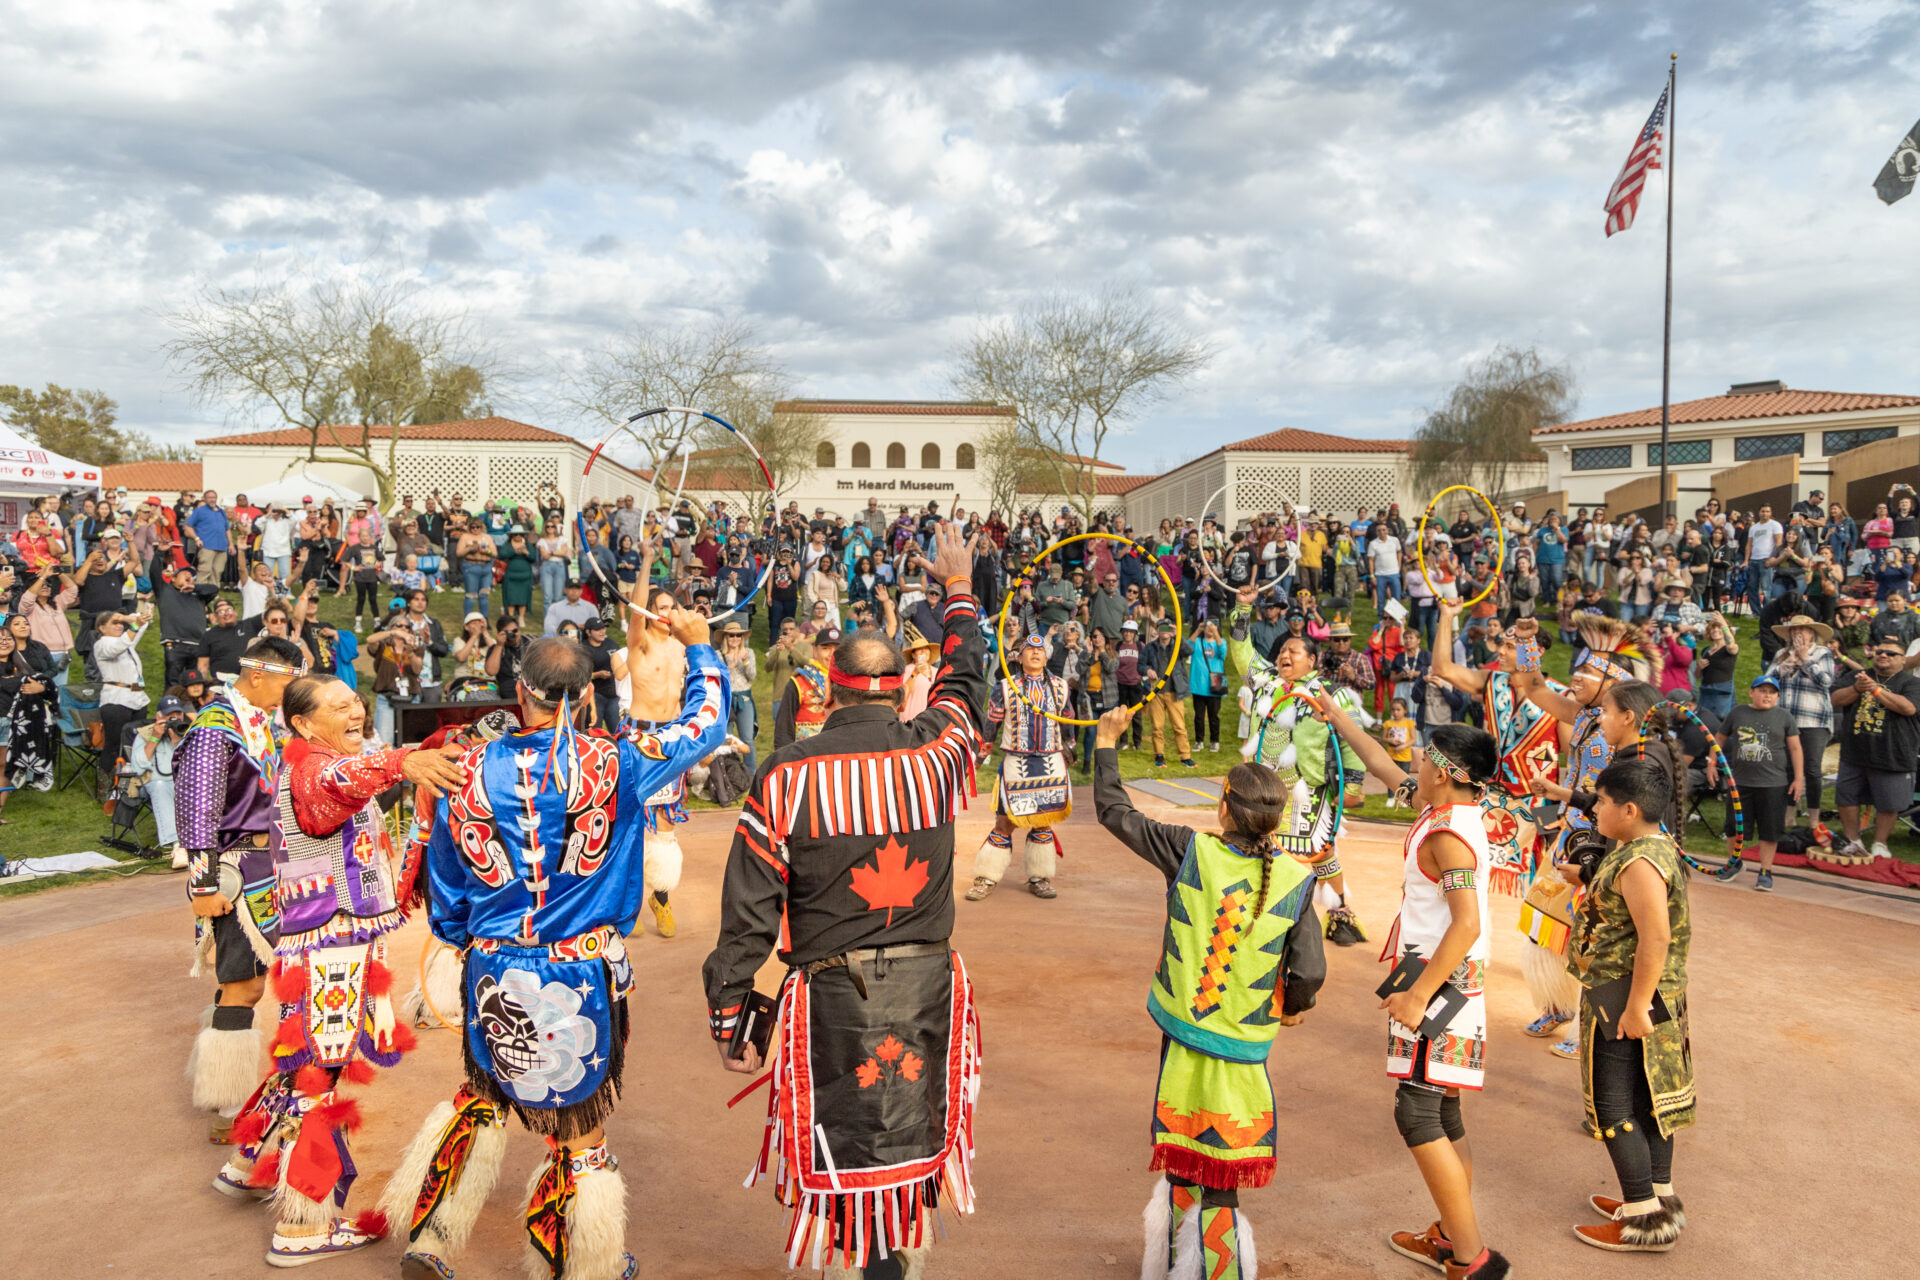 A group of native americans are dancing in front of a crowd.